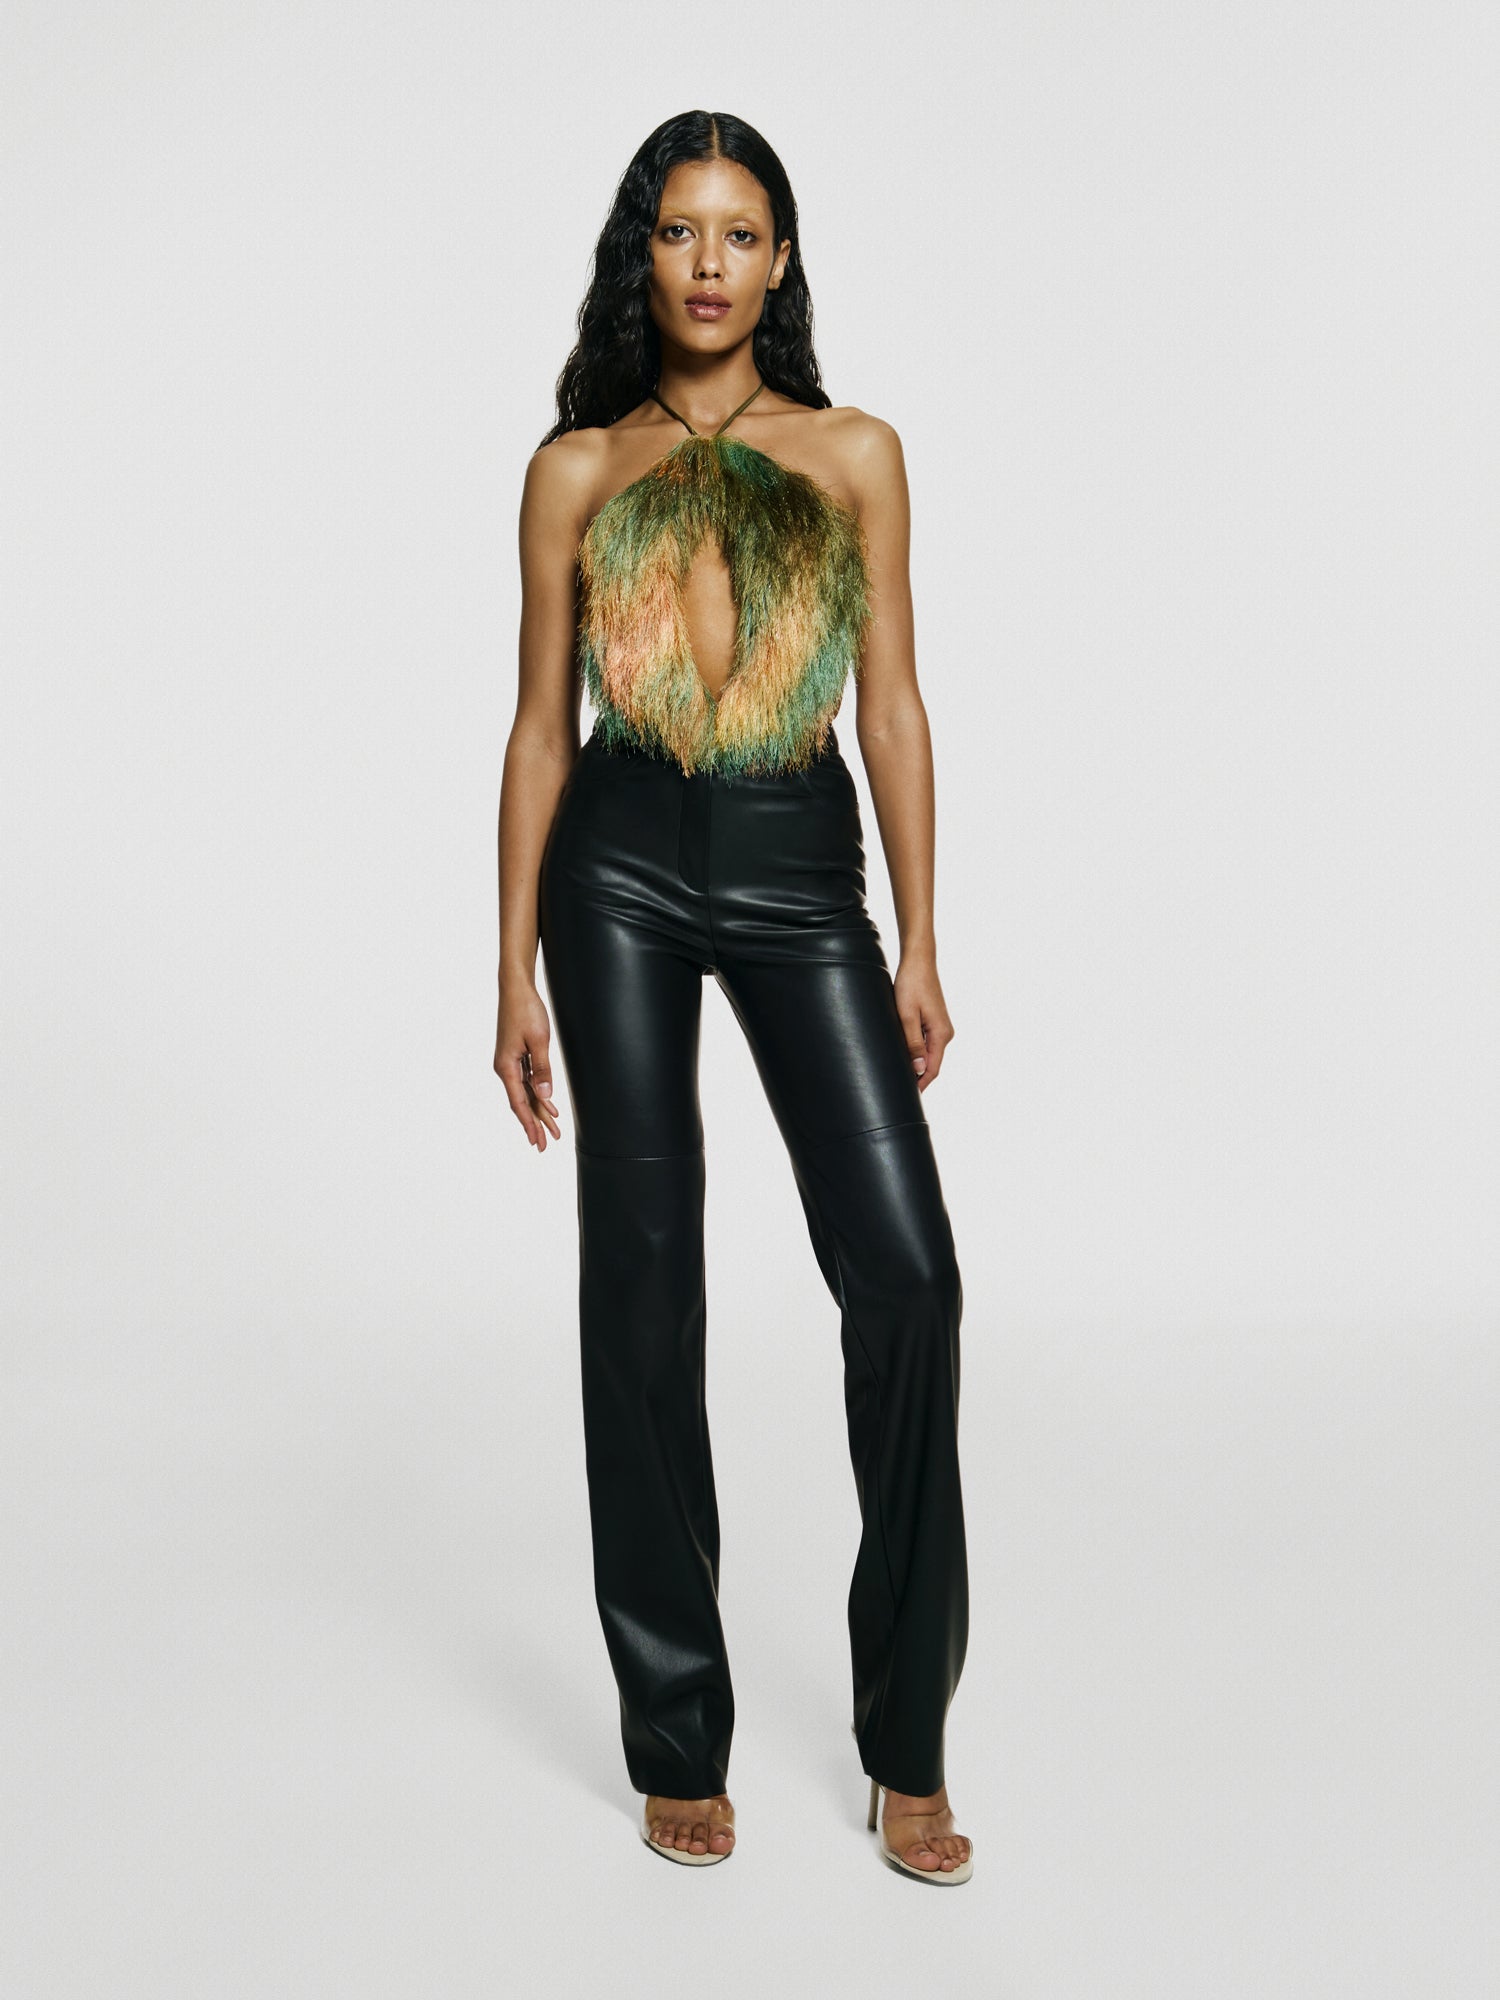 Medium full shot of a girl in a green opened back sleeveless bodysuit with a vertical cut in front and black leather high rise straight leg pants